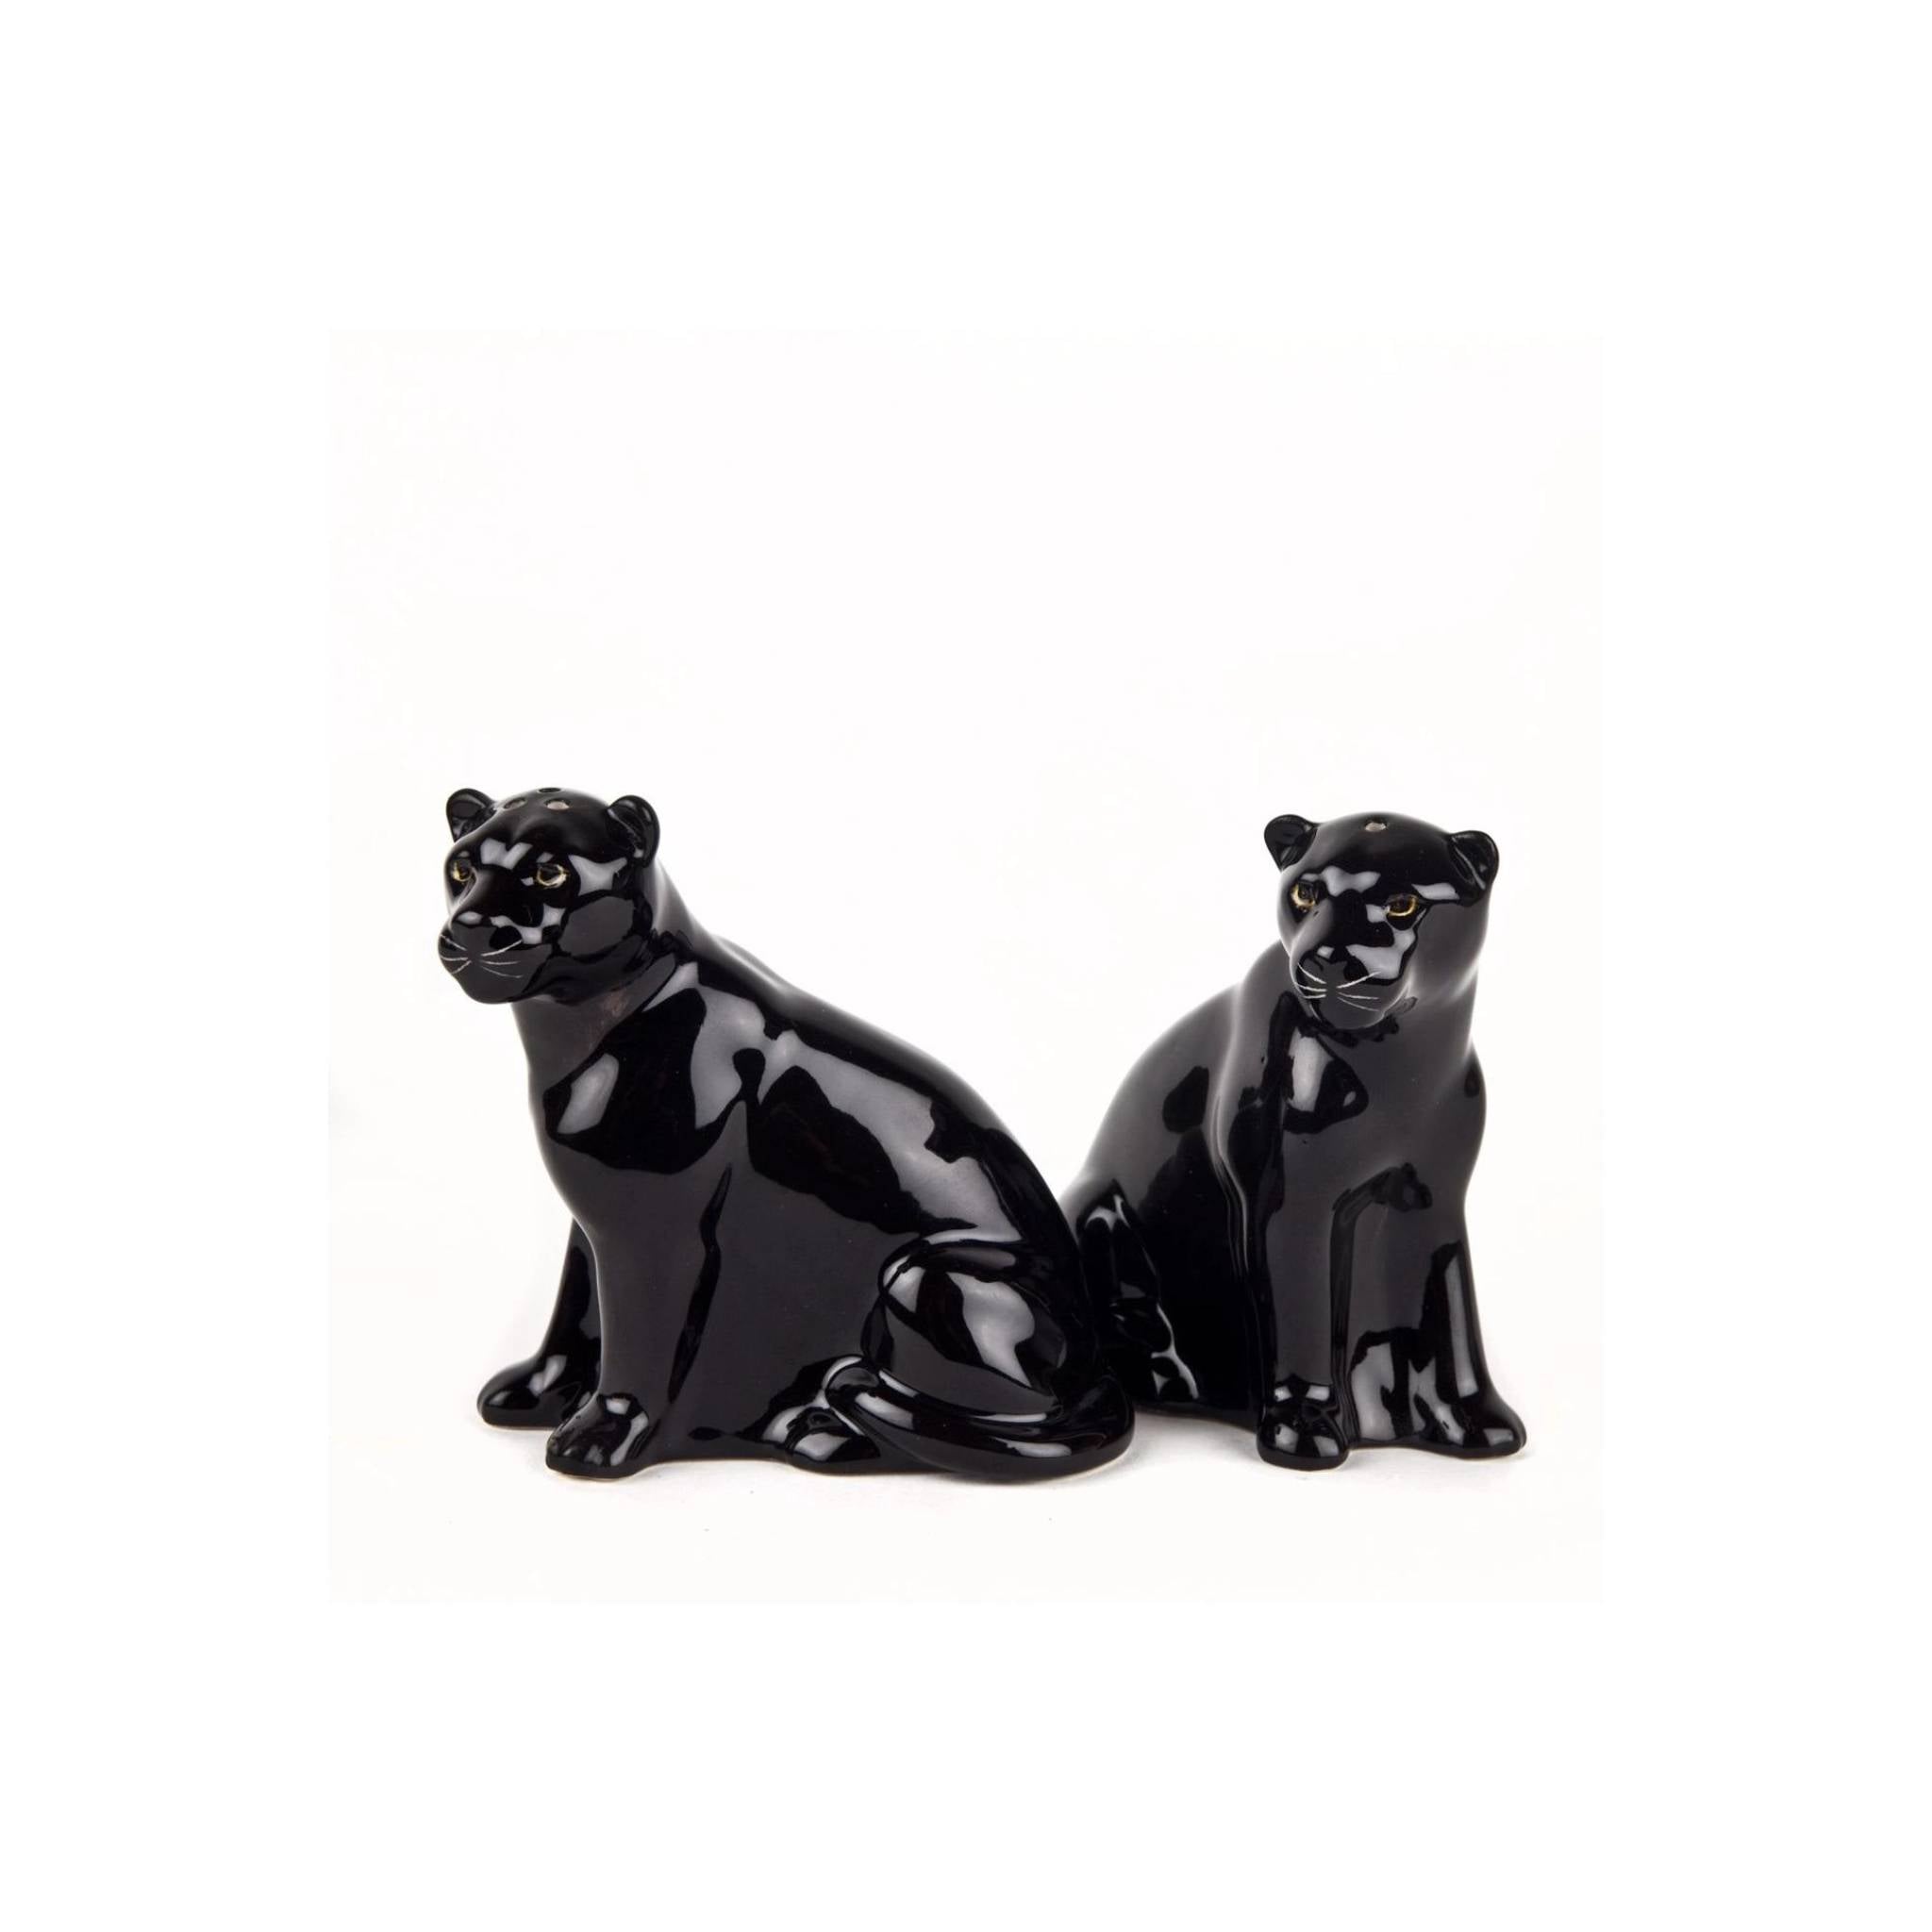 Panther Salt and Pepper Shaker